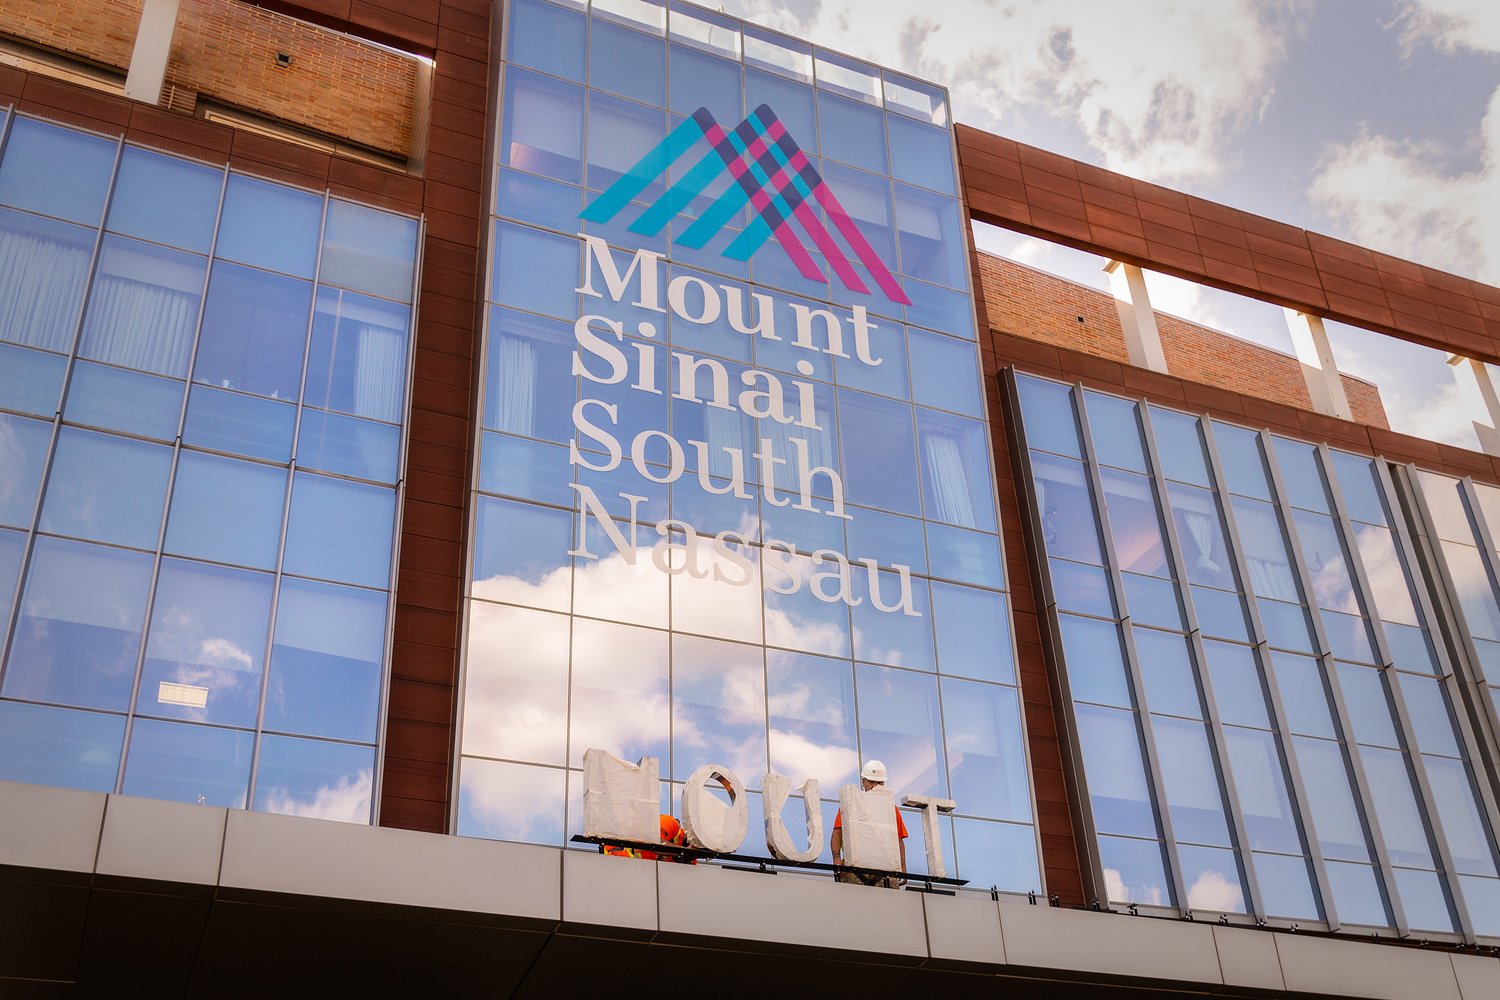 Mount Sinai South Nassau was named as one of the region's best hospitals by U.S. News & World Report.